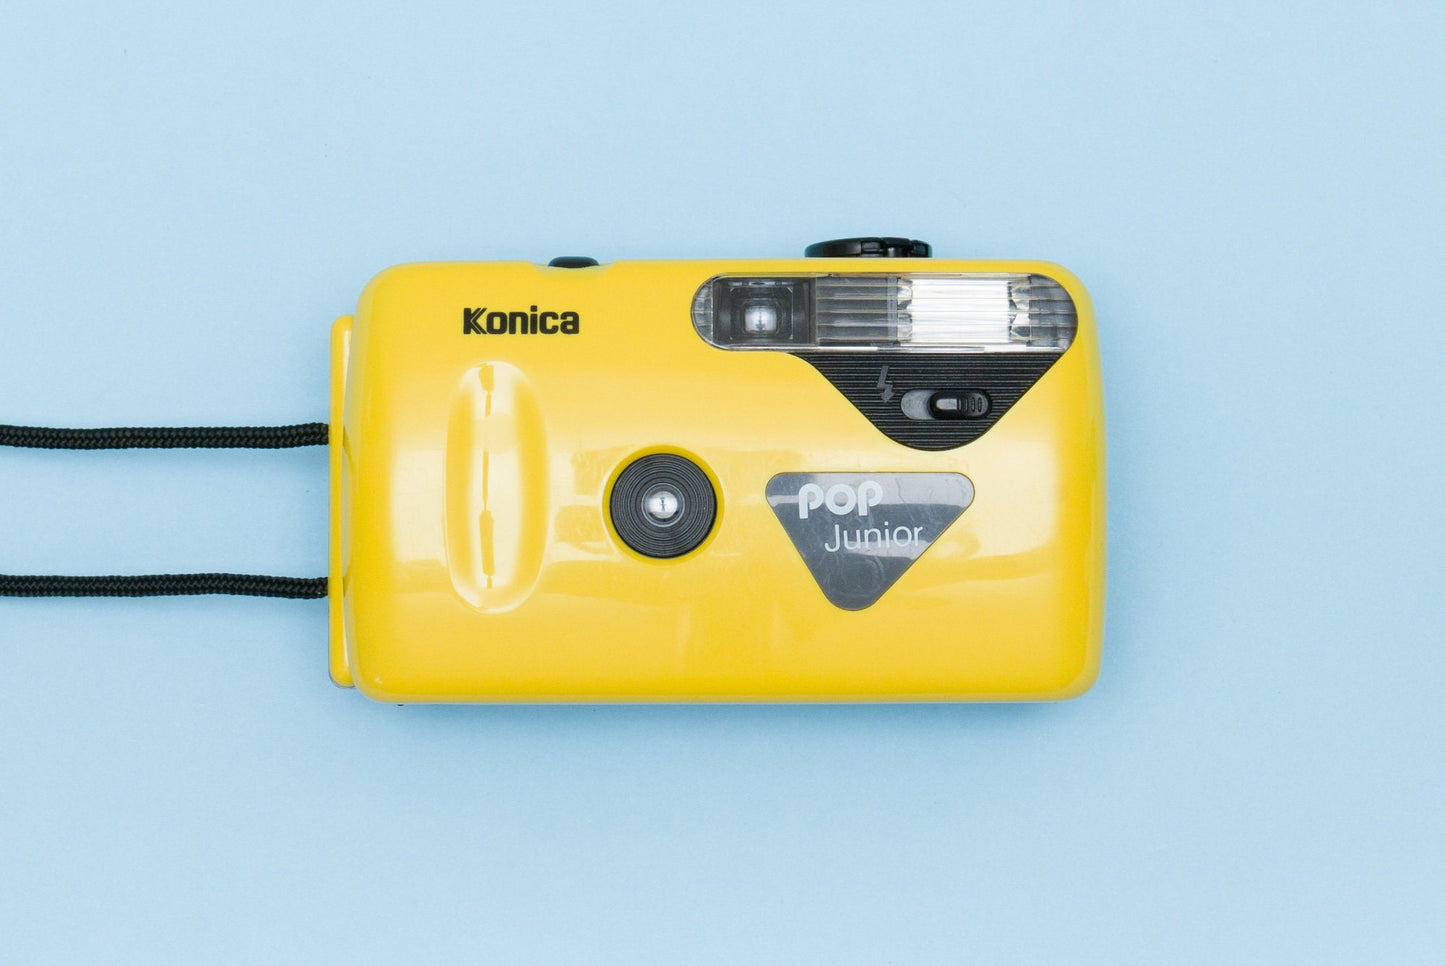 Konica POP Junior 35mm Compact Point and Shoot Film Camera